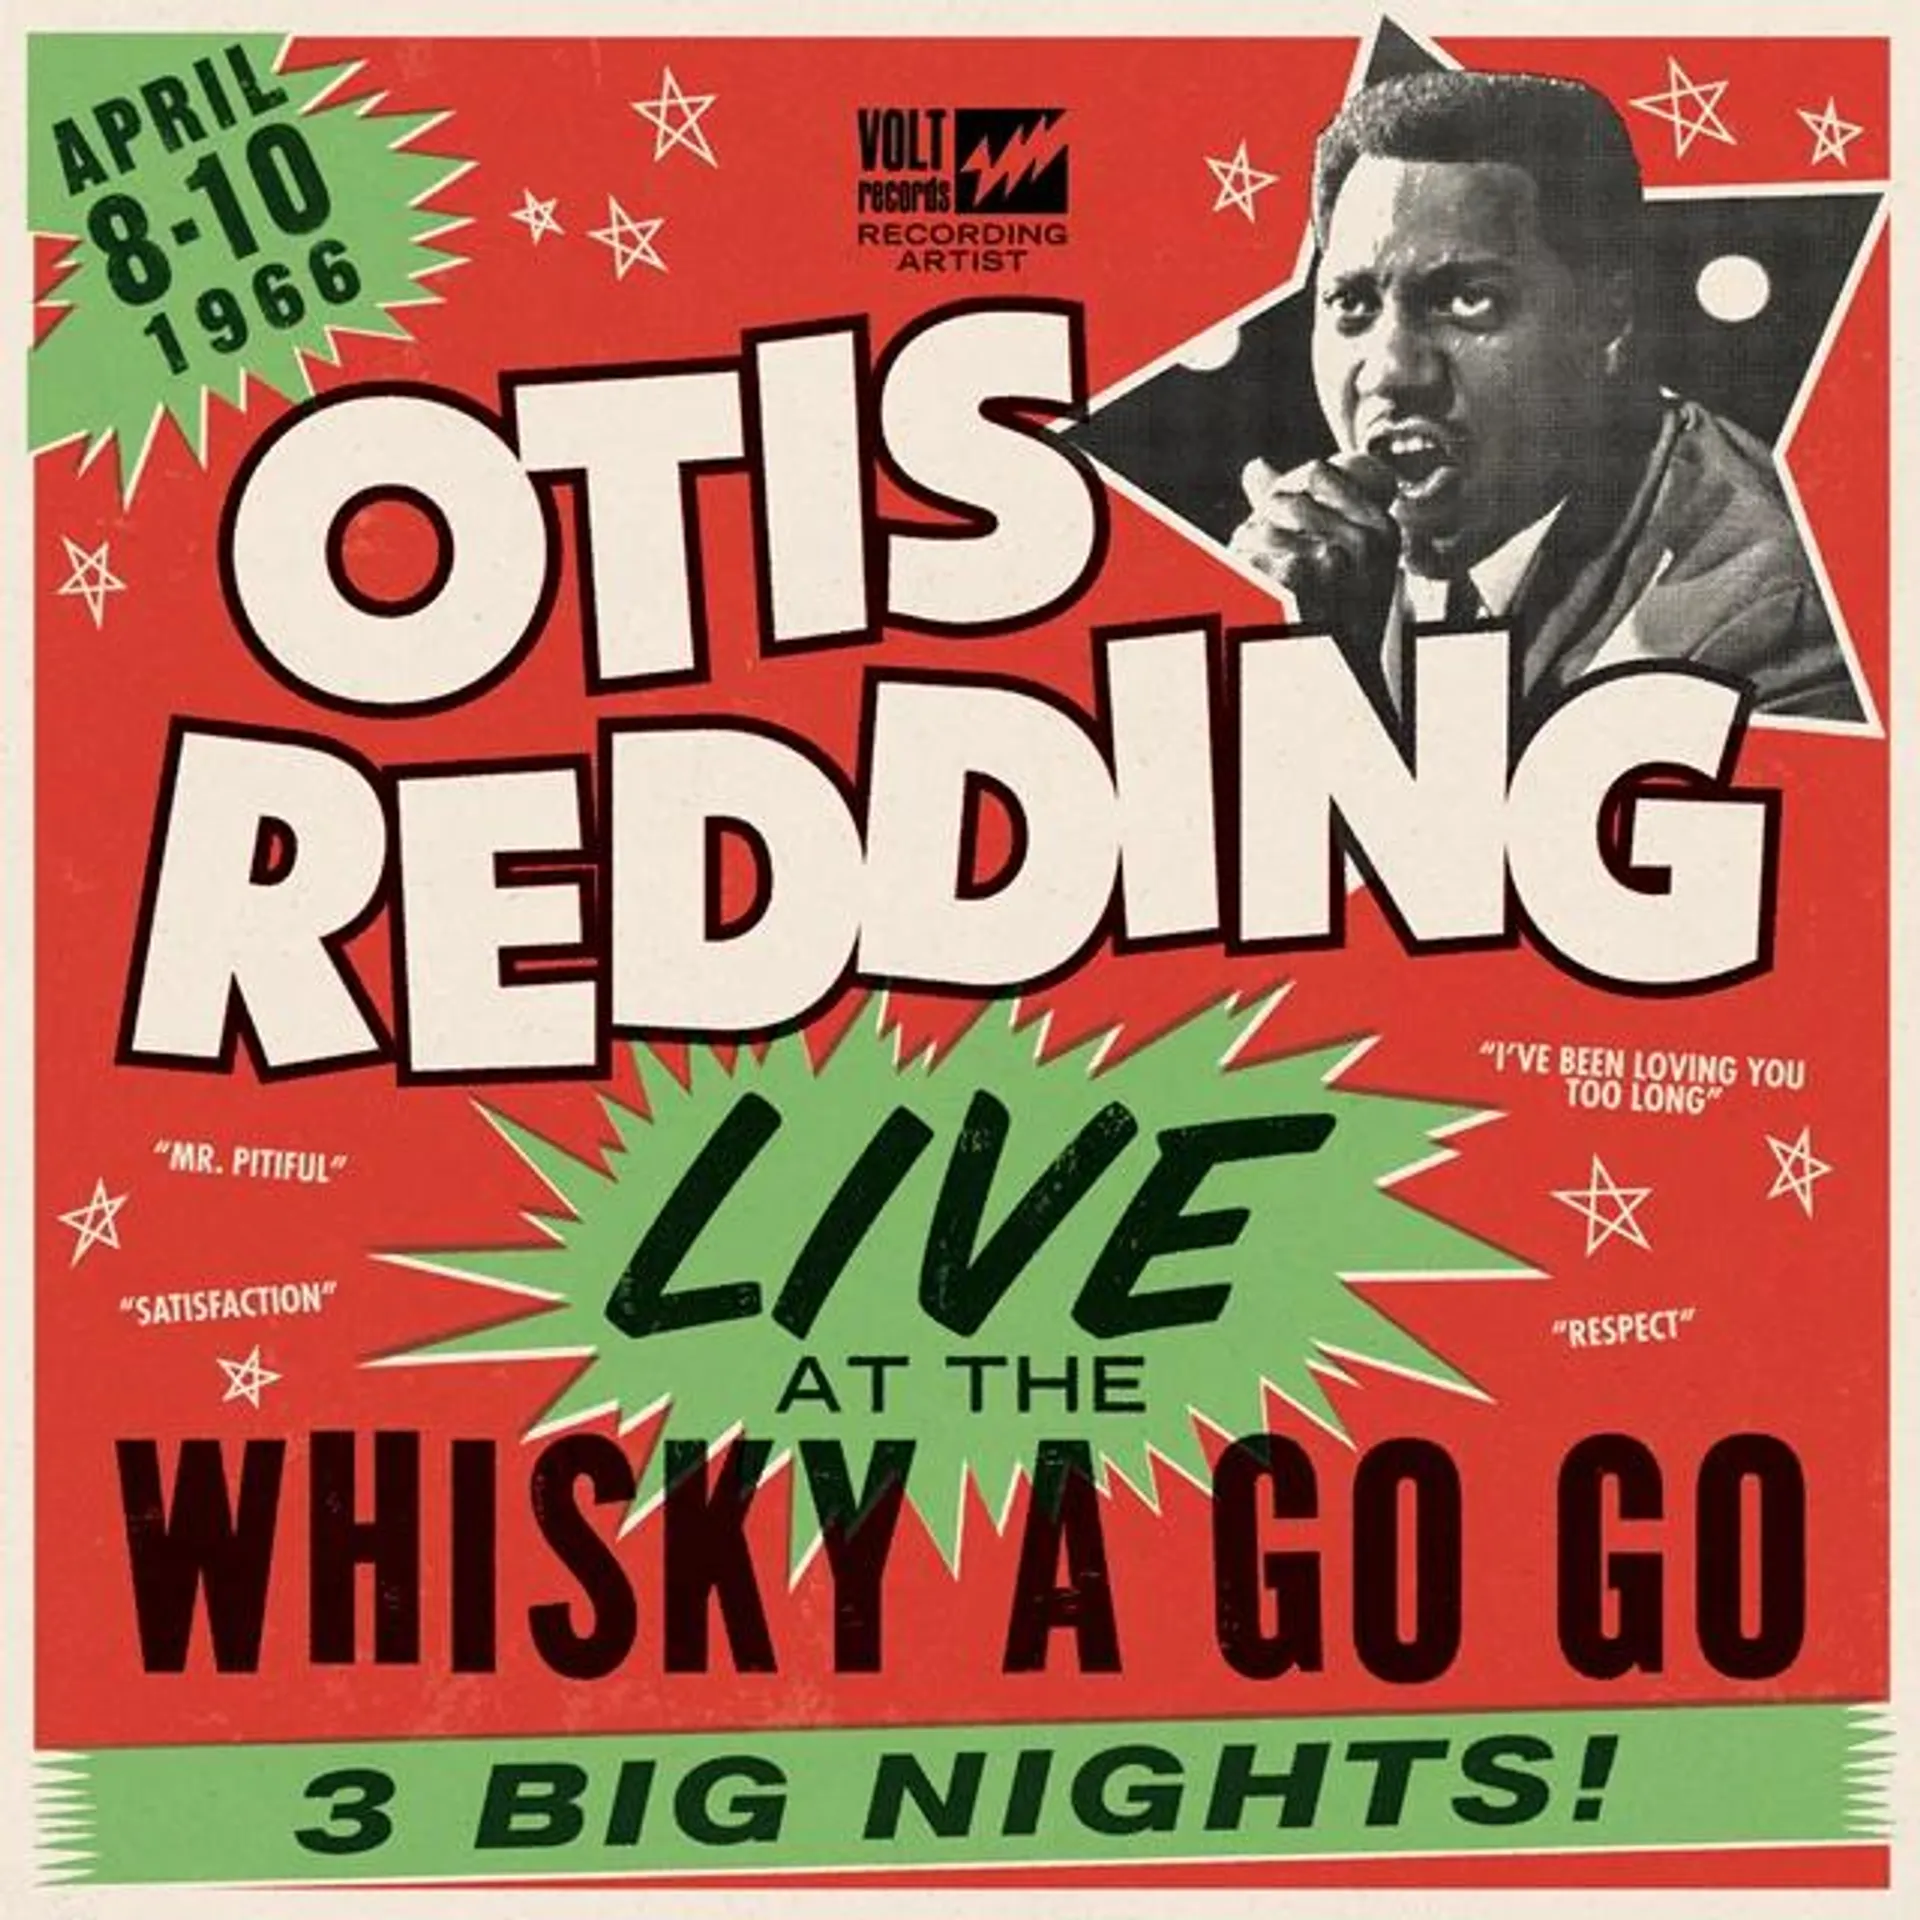 Live at the Whisky a Go Go: 8-10 April 1966 - 3 Big Nights!